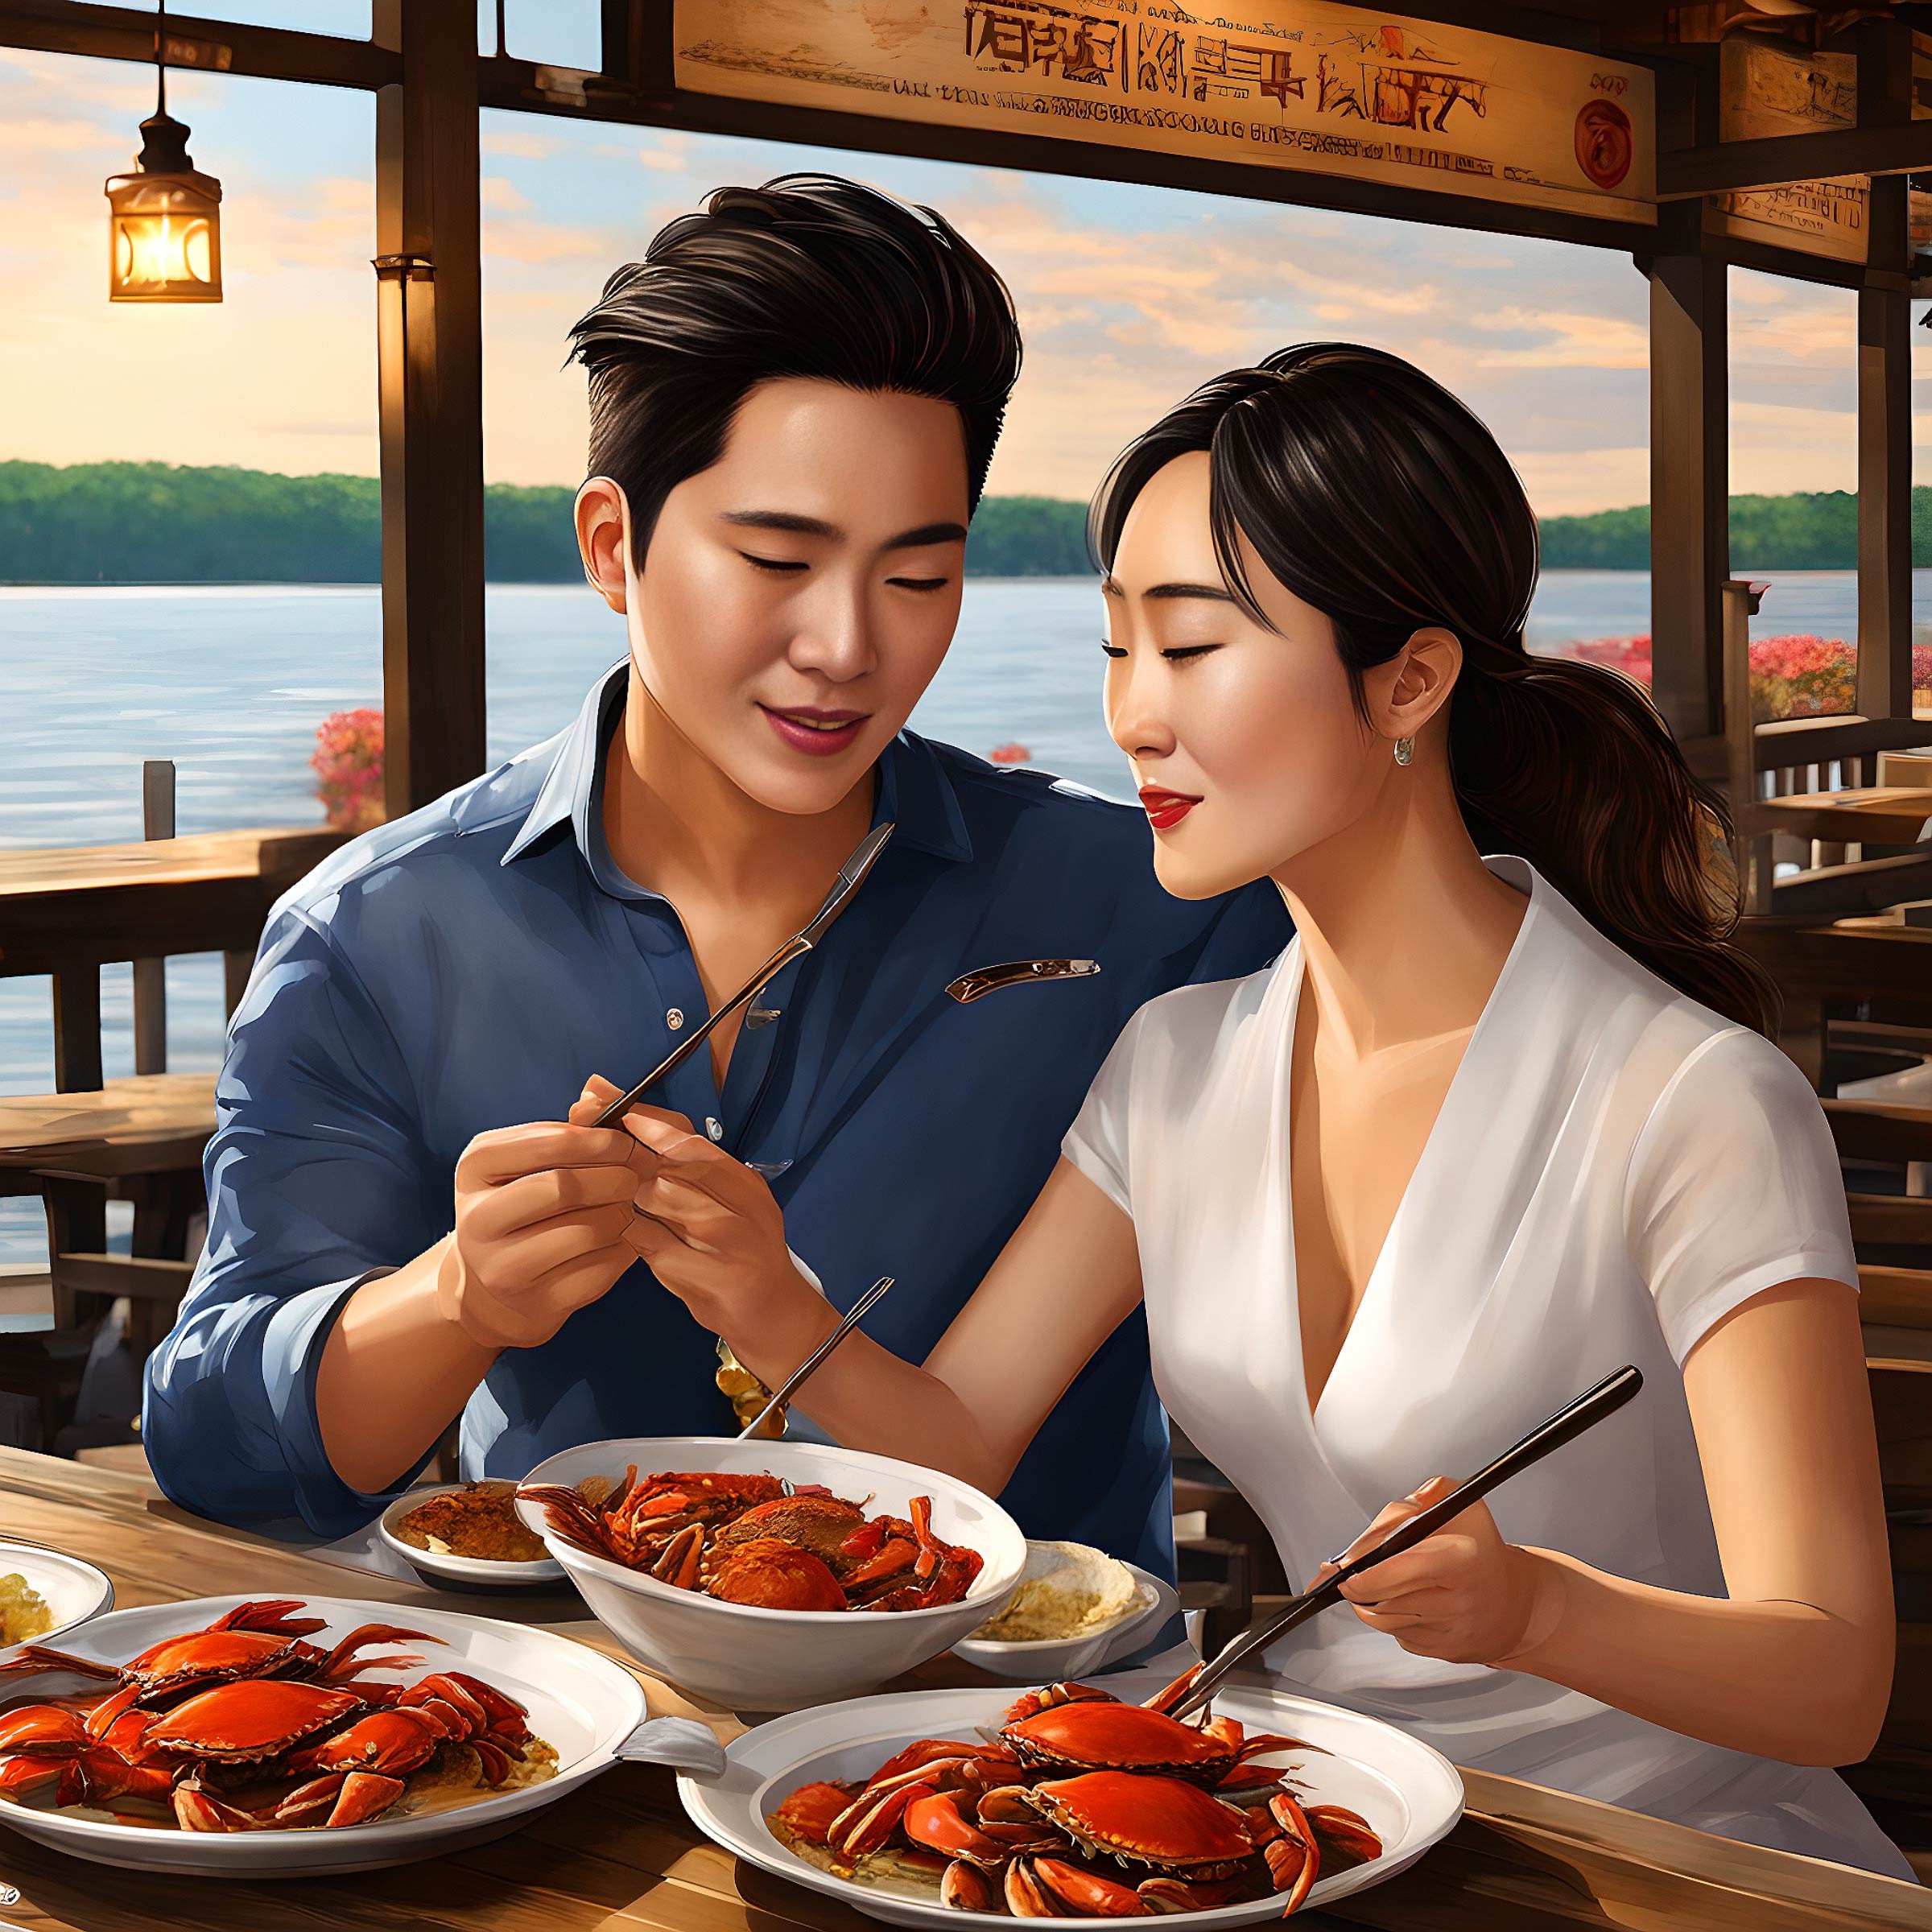 Man and woman enjoying Maryland steamed crabs